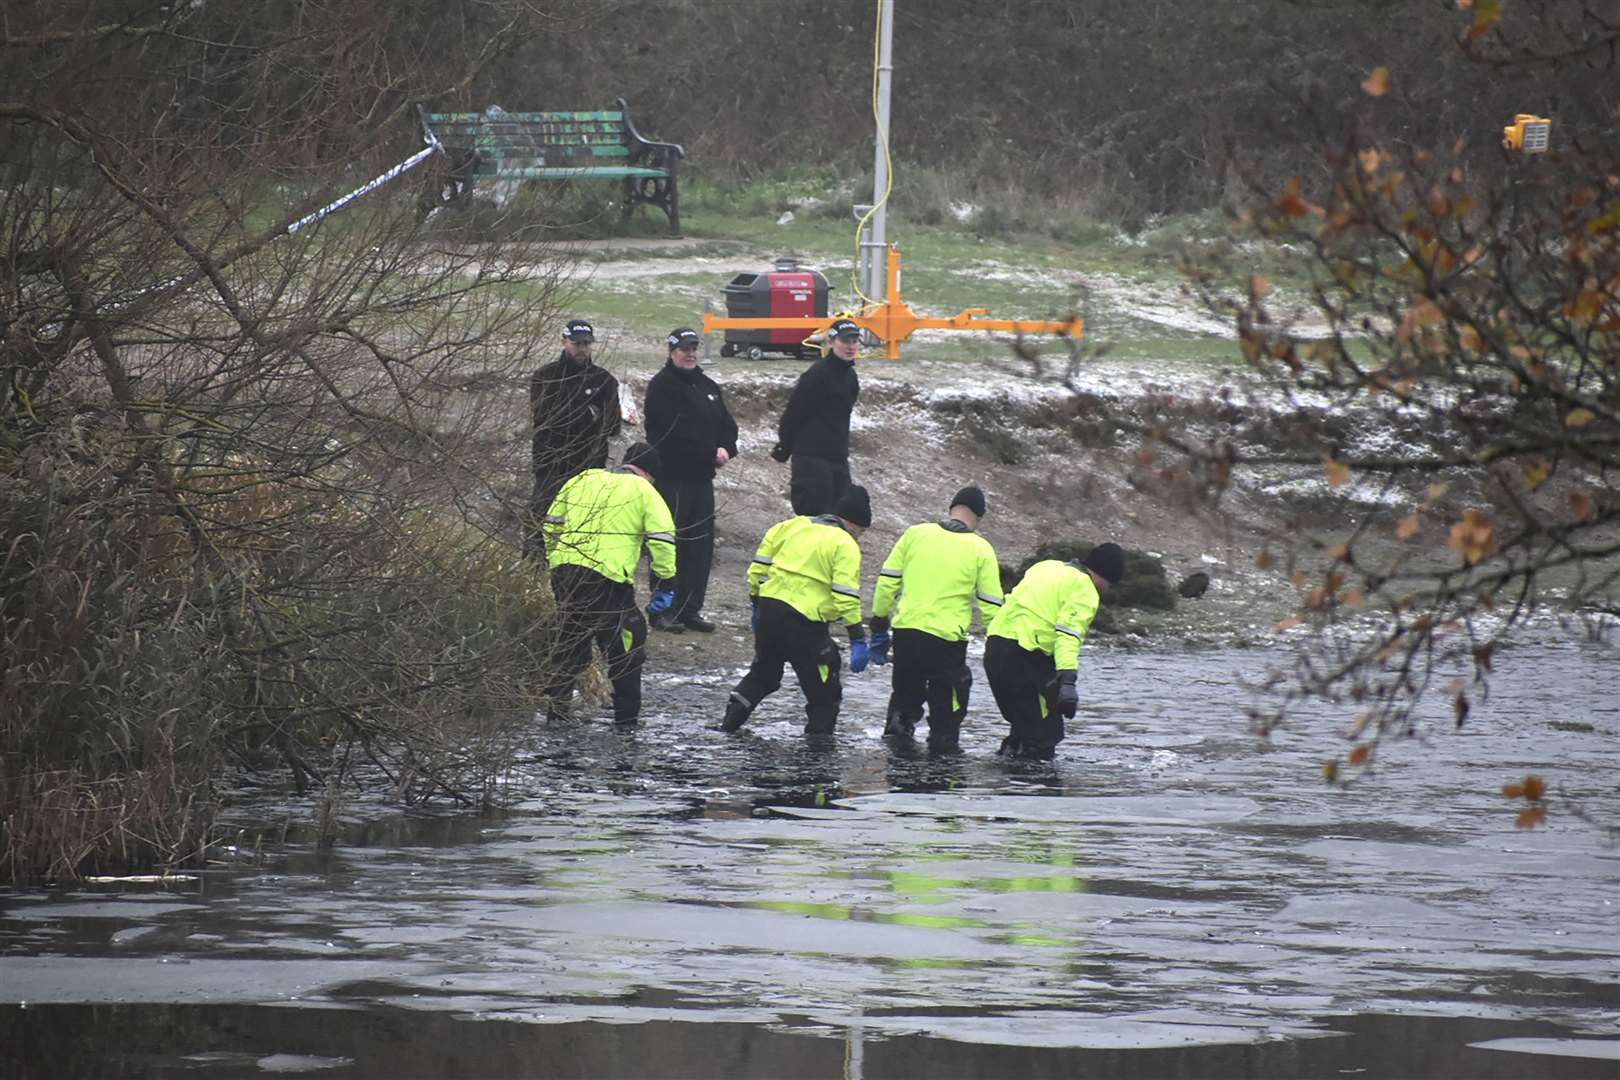 A boy is fighting for his life after falling into an icy lake in Solihull on Sunday (Matthew Cooper/PA)